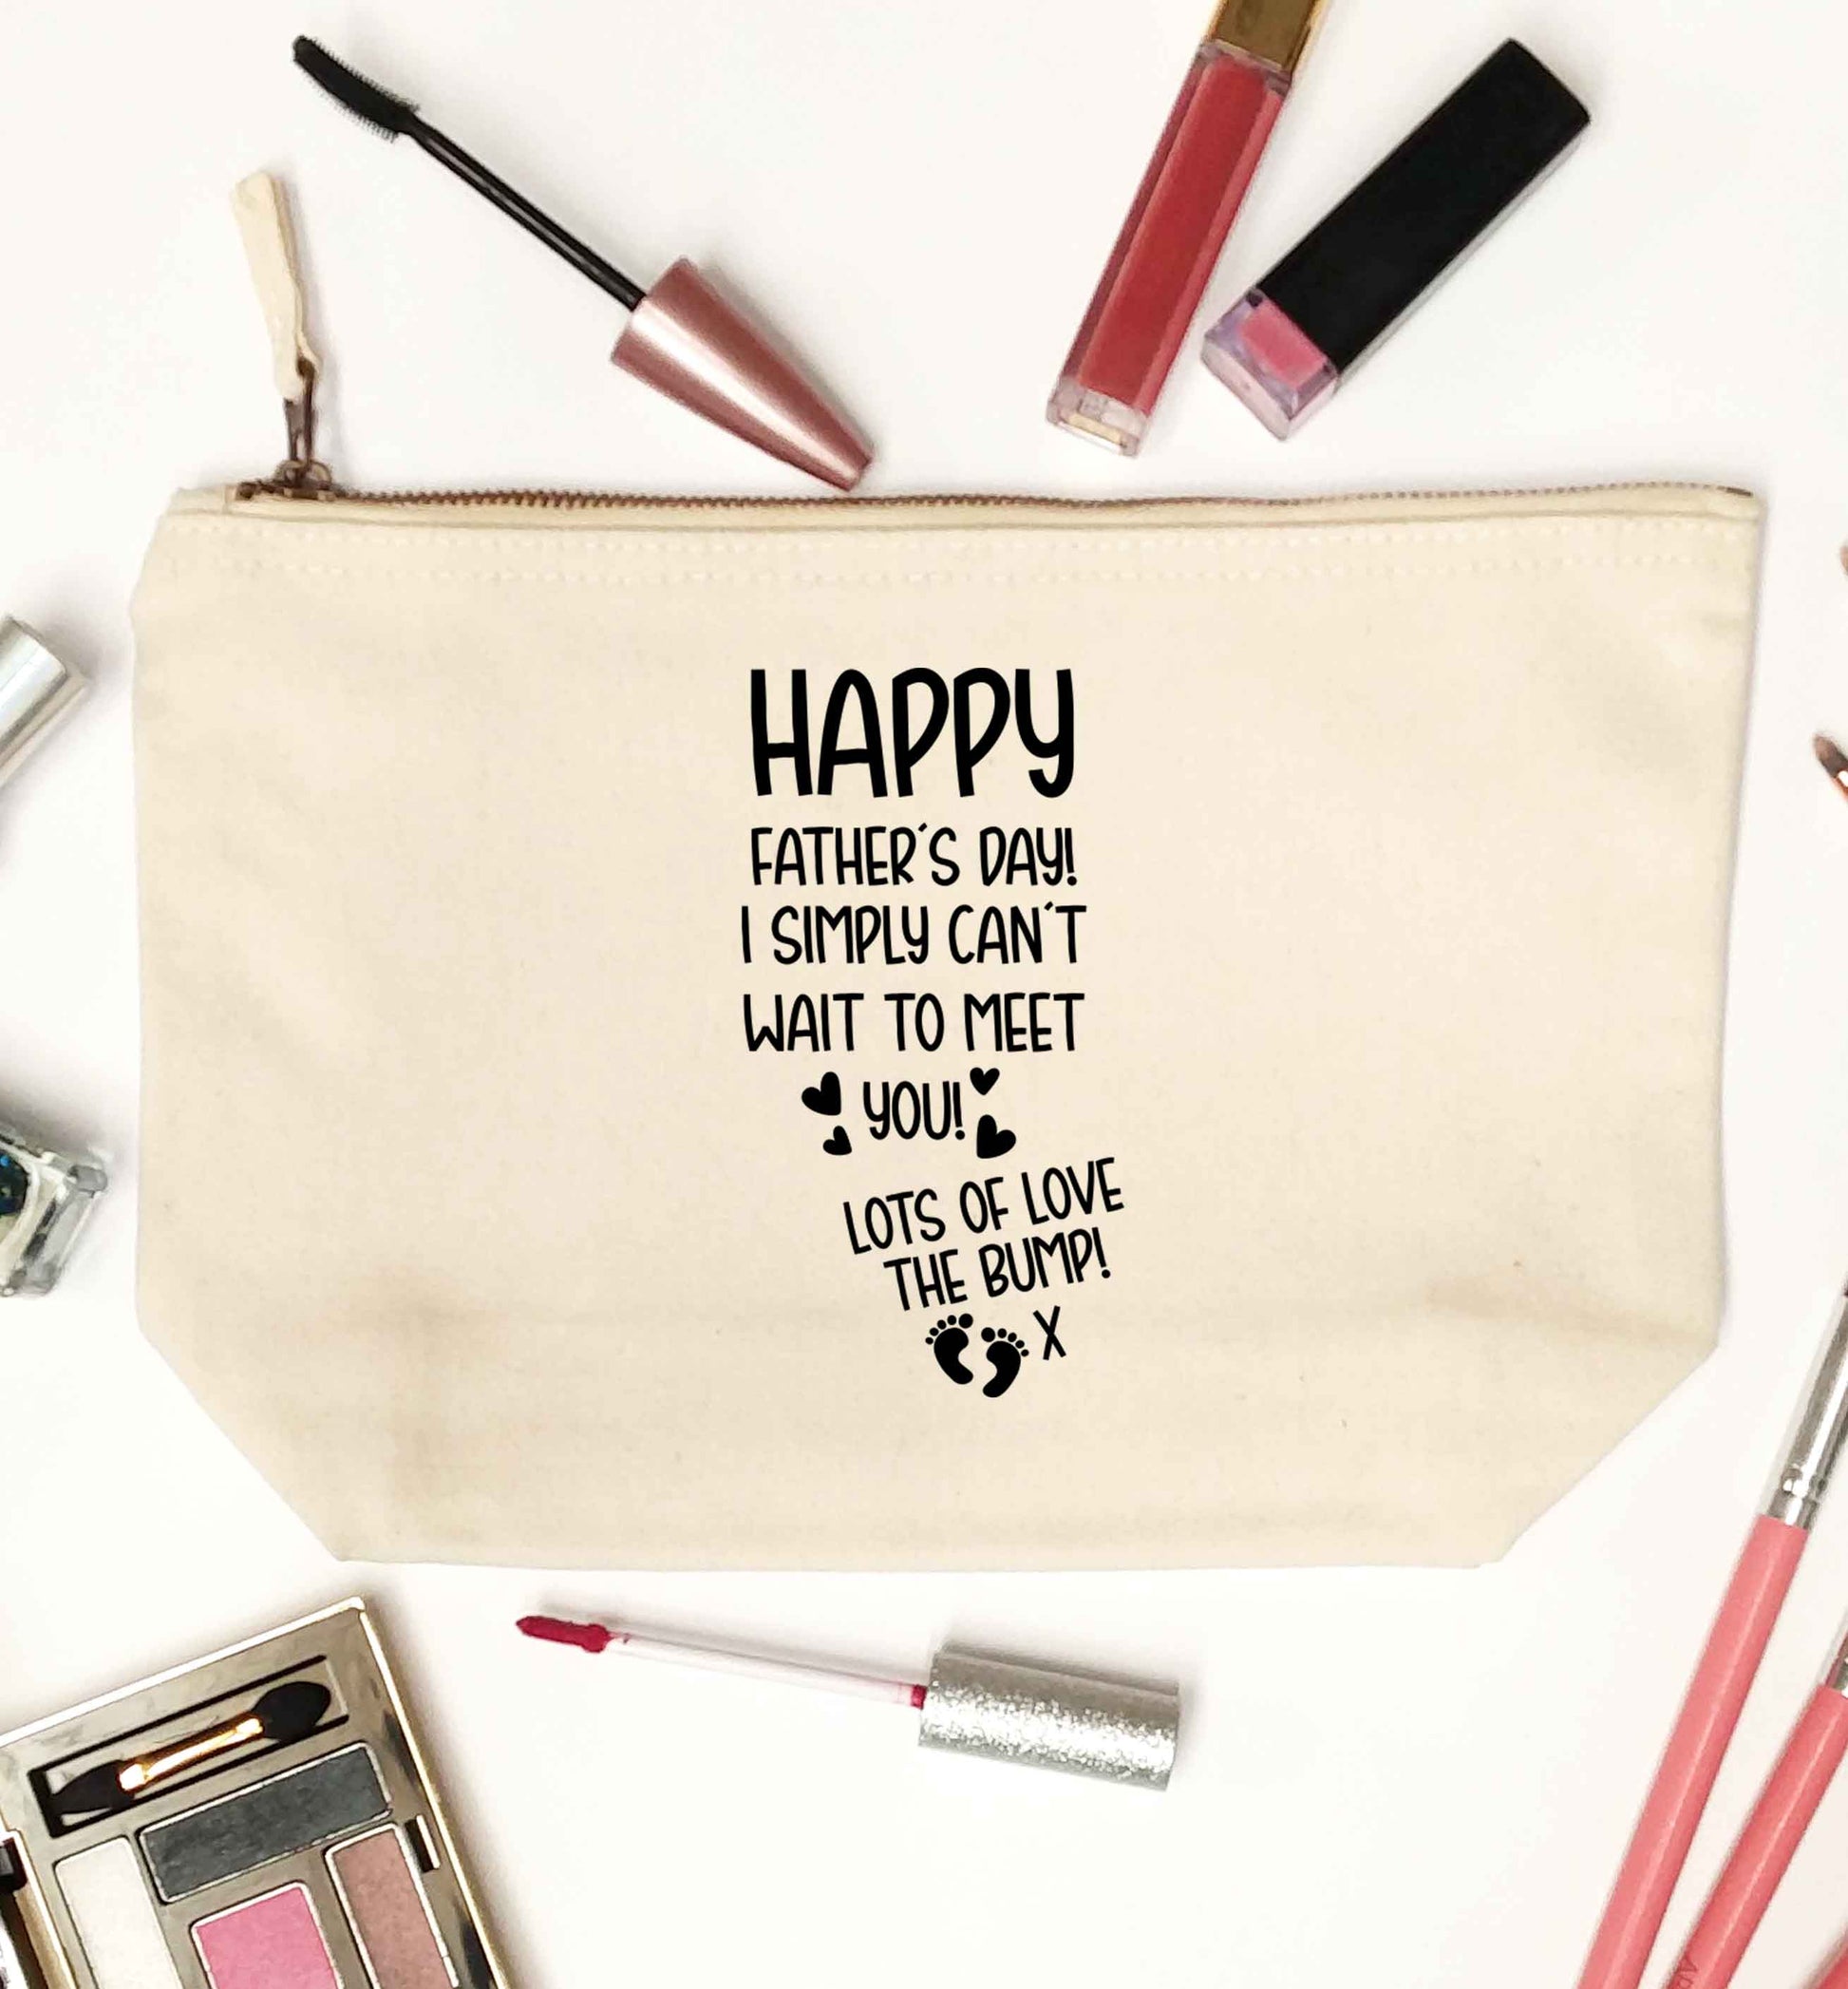 Happy Father's day daddy I can't wait to meet you lot's of love the bump! natural makeup bag